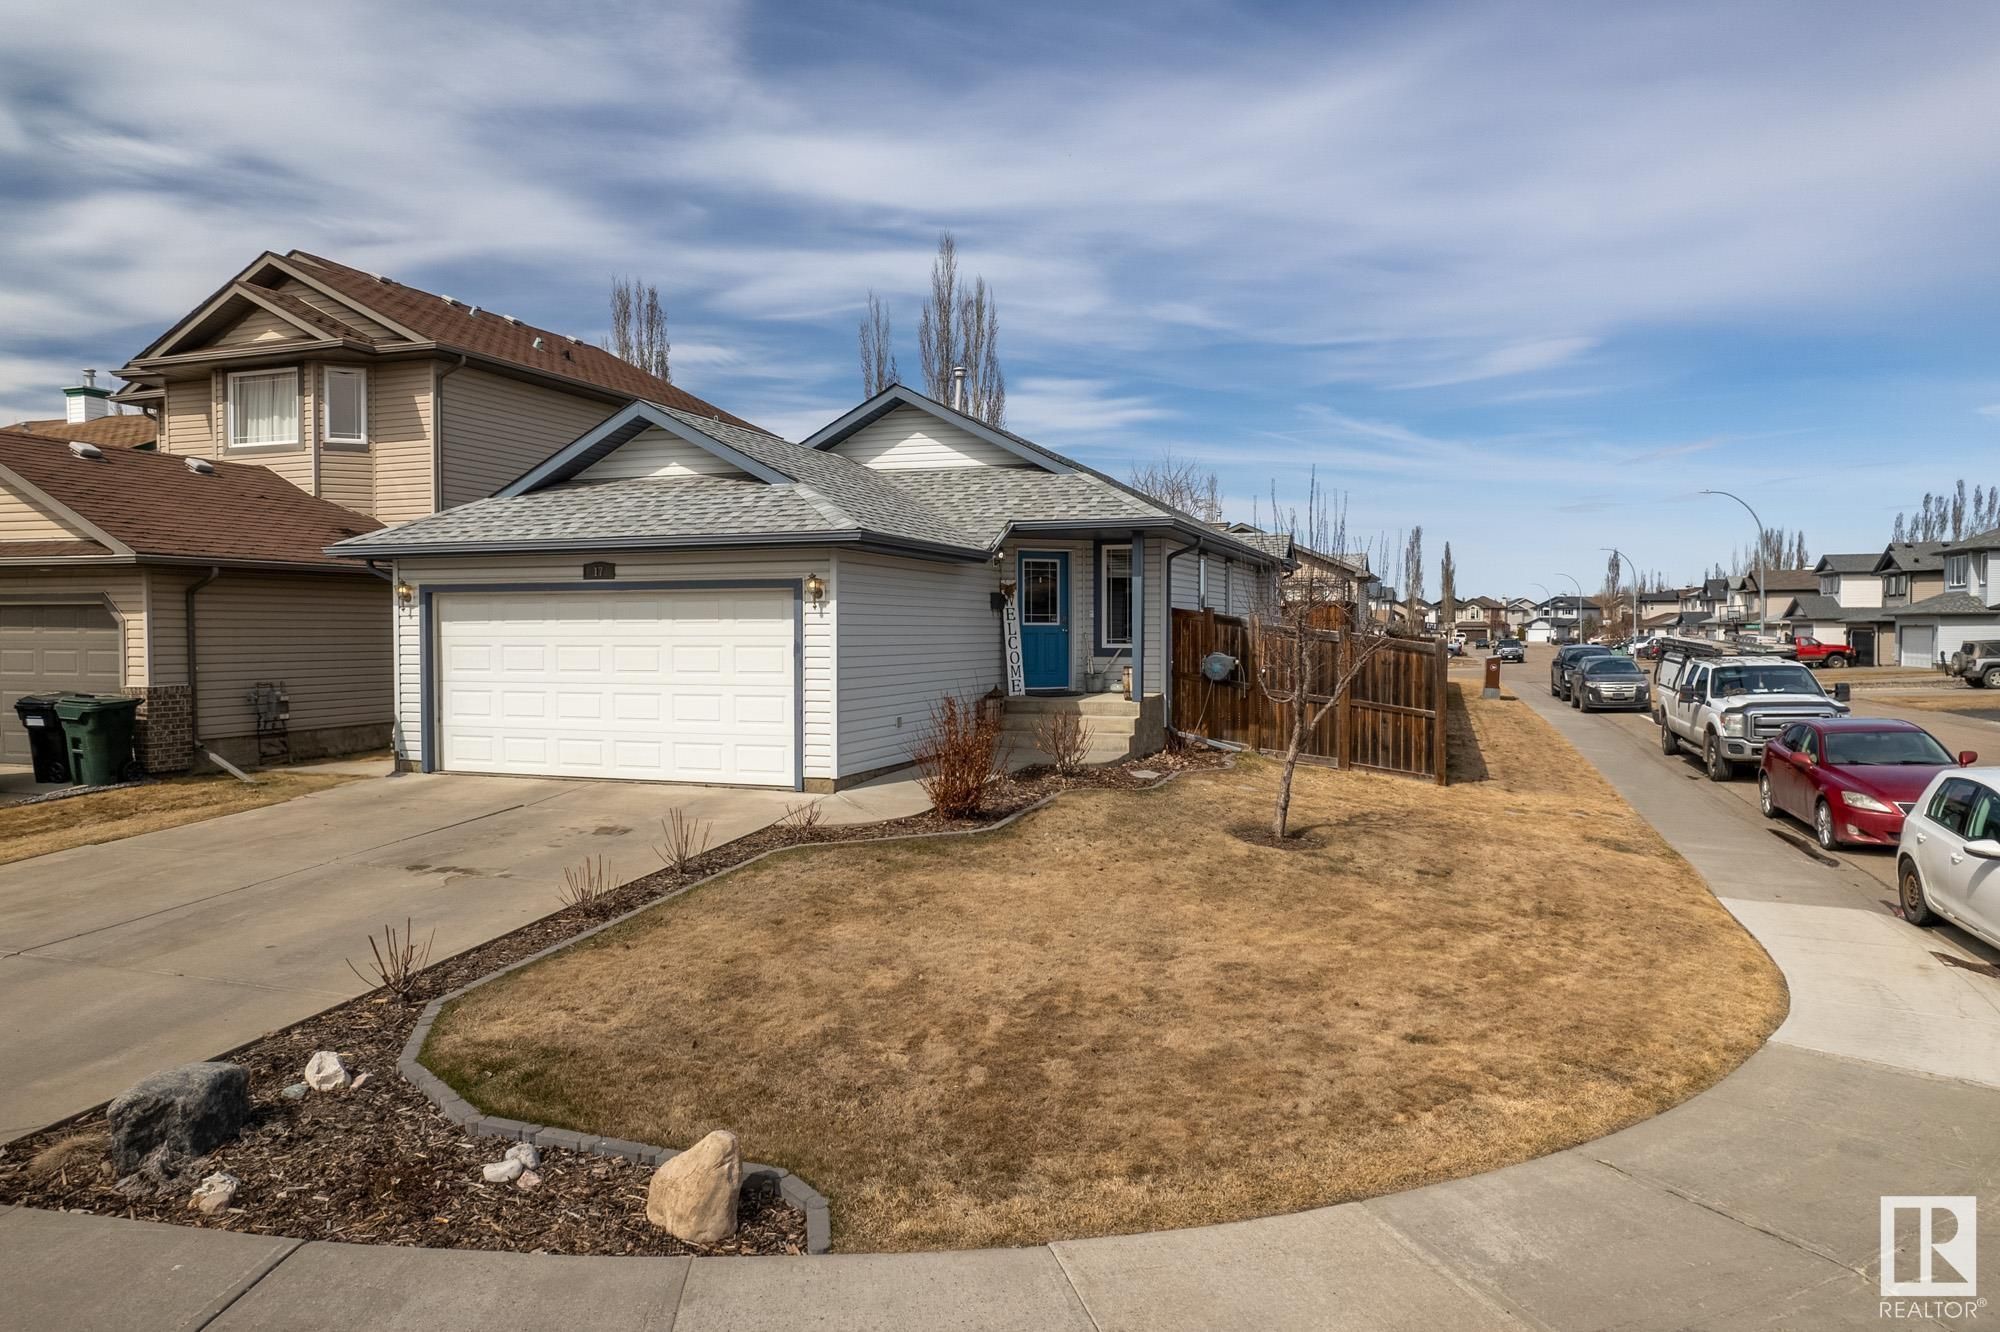 New property listed in Spruce Grove, Spruce Grove